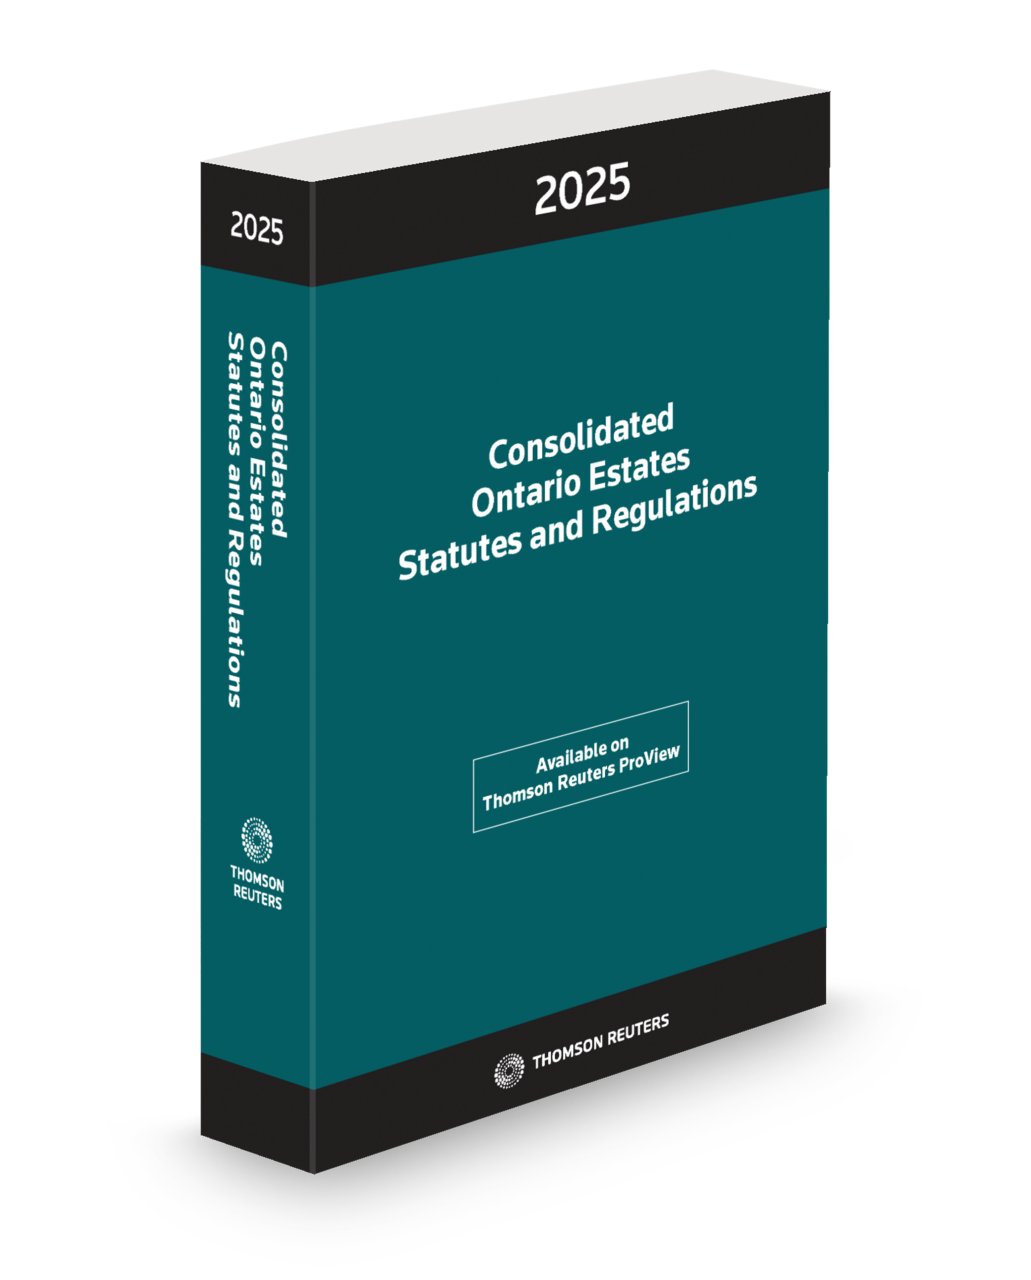 Cover image of Consolidated Ontario Estates Statutes and Regulations 2025